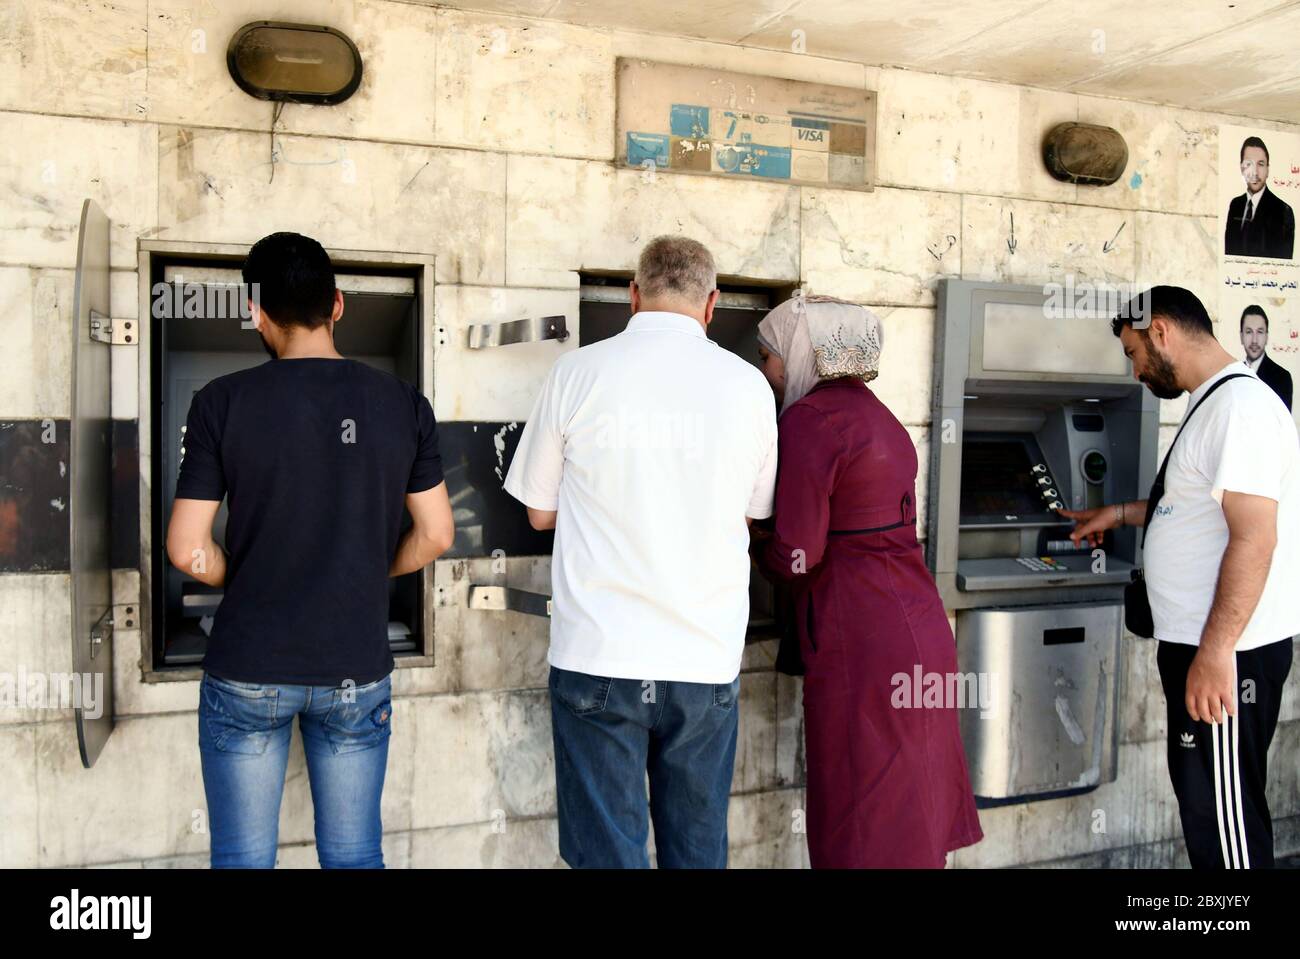 Damascus, Syria. 7th June, 2020. Syrians use ATMs in Damascus, capital of Syria, on June 7, 2020. Syrians have been complaining about the skyrocketing prices amid a tough economic situation. Credit: Ammar Safarjalani/Xinhua/Alamy Live News Stock Photo